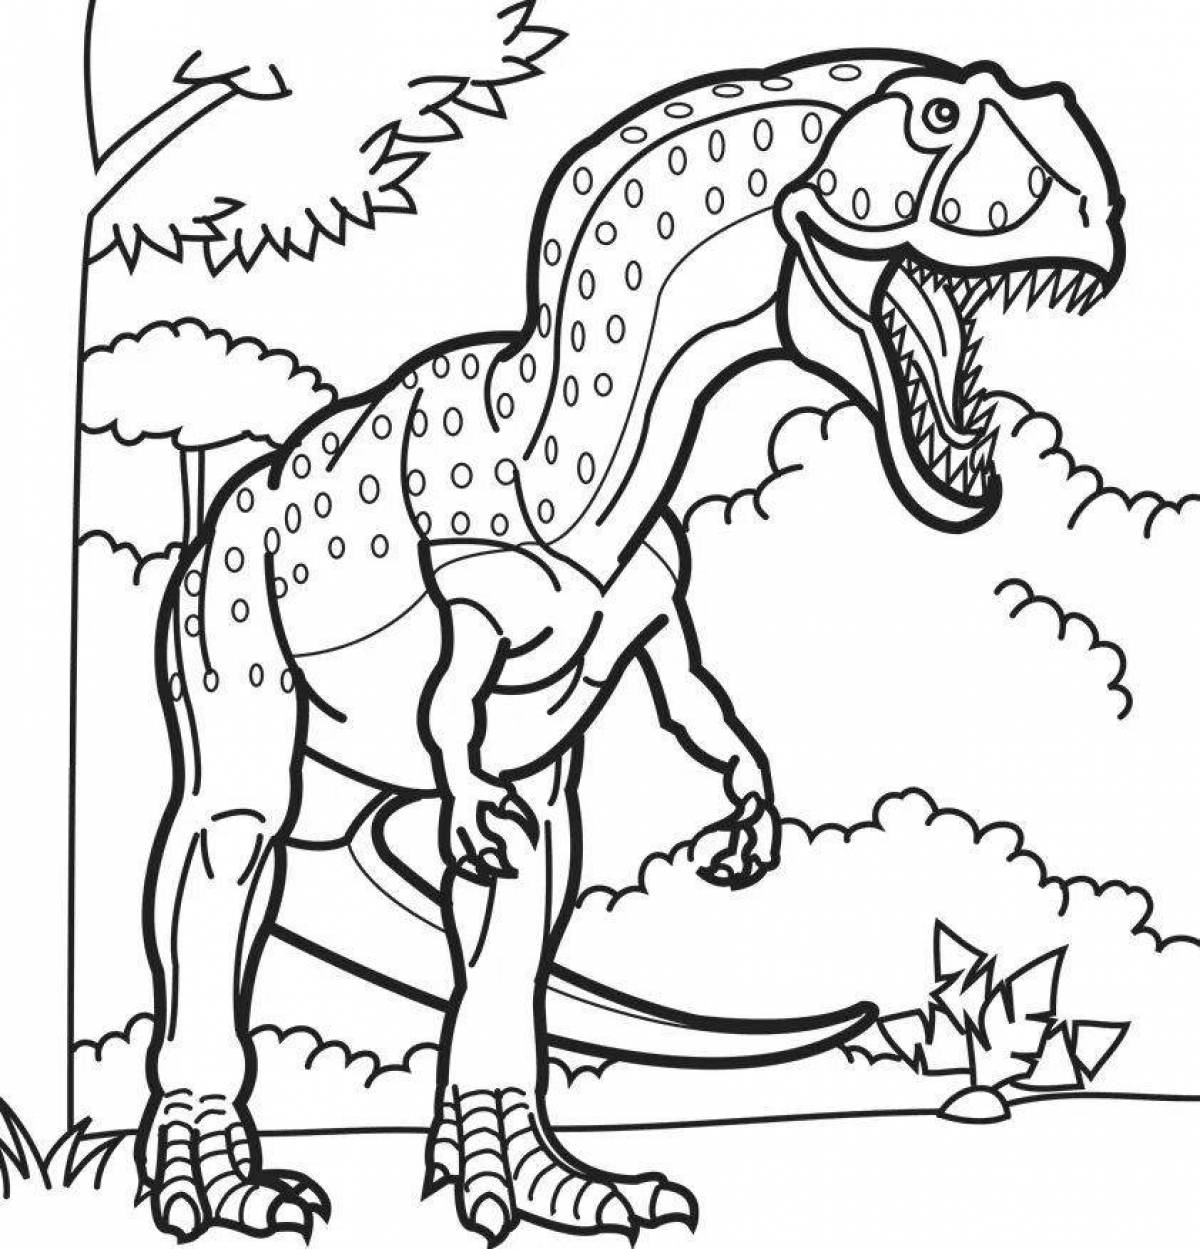 Fabulous dinosaurs coloring for kids